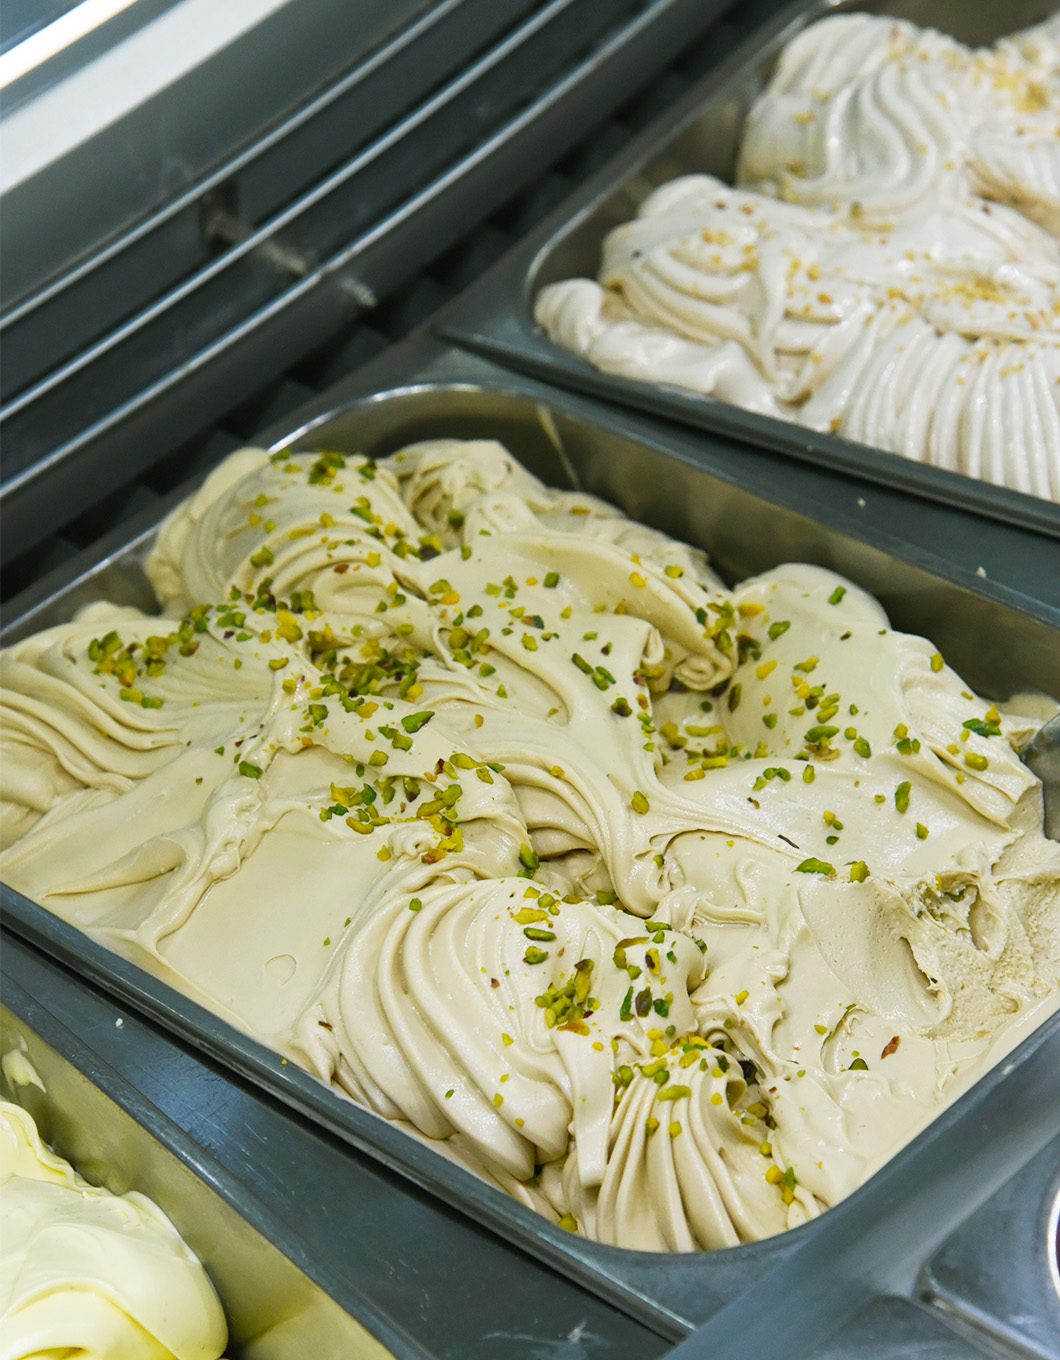 The best-seller flavour pistacchio at the gelateria B.ICE in Florence 